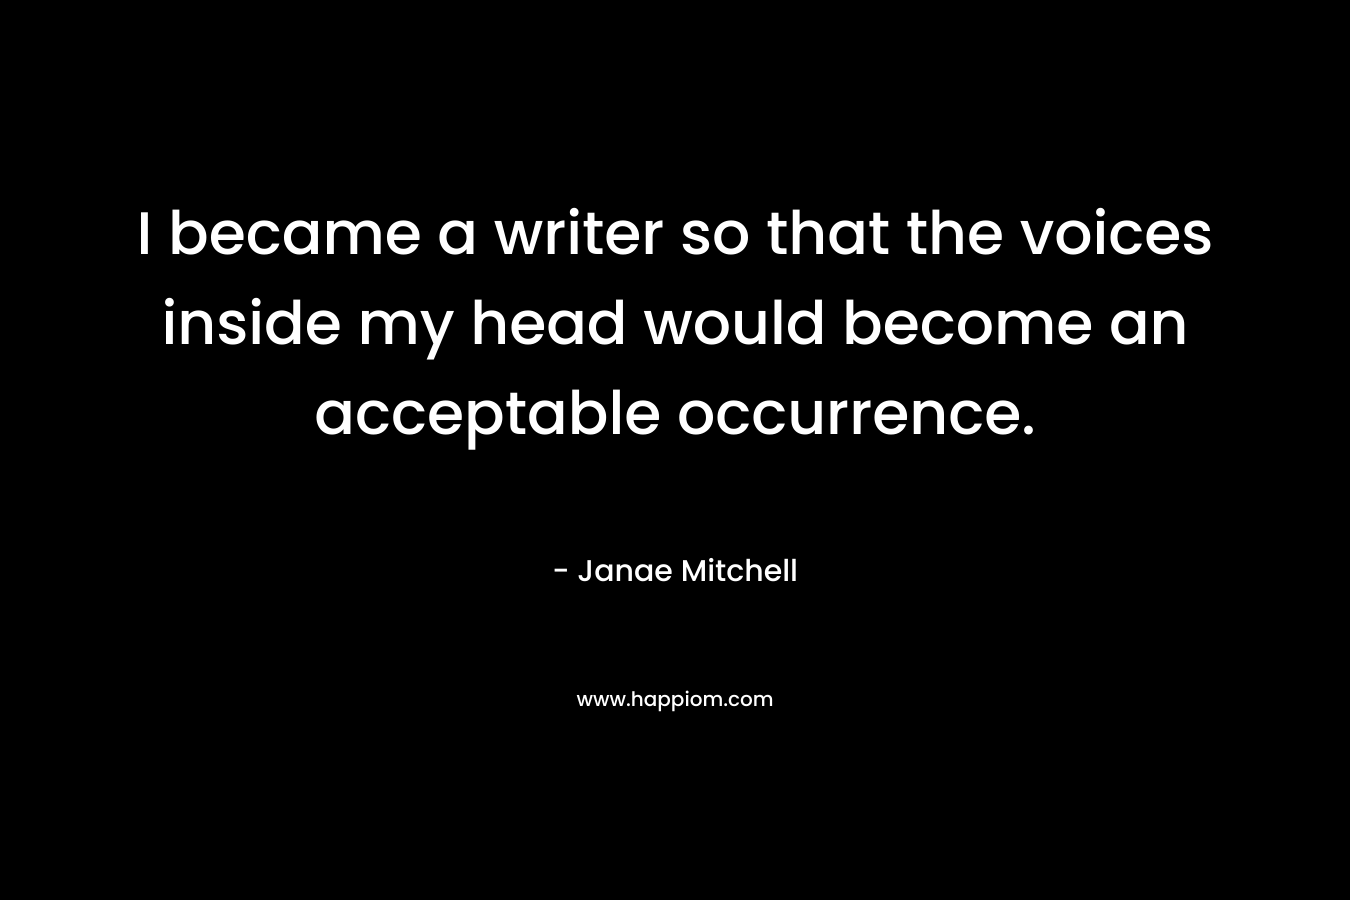 I became a writer so that the voices inside my head would become an acceptable occurrence. – Janae Mitchell